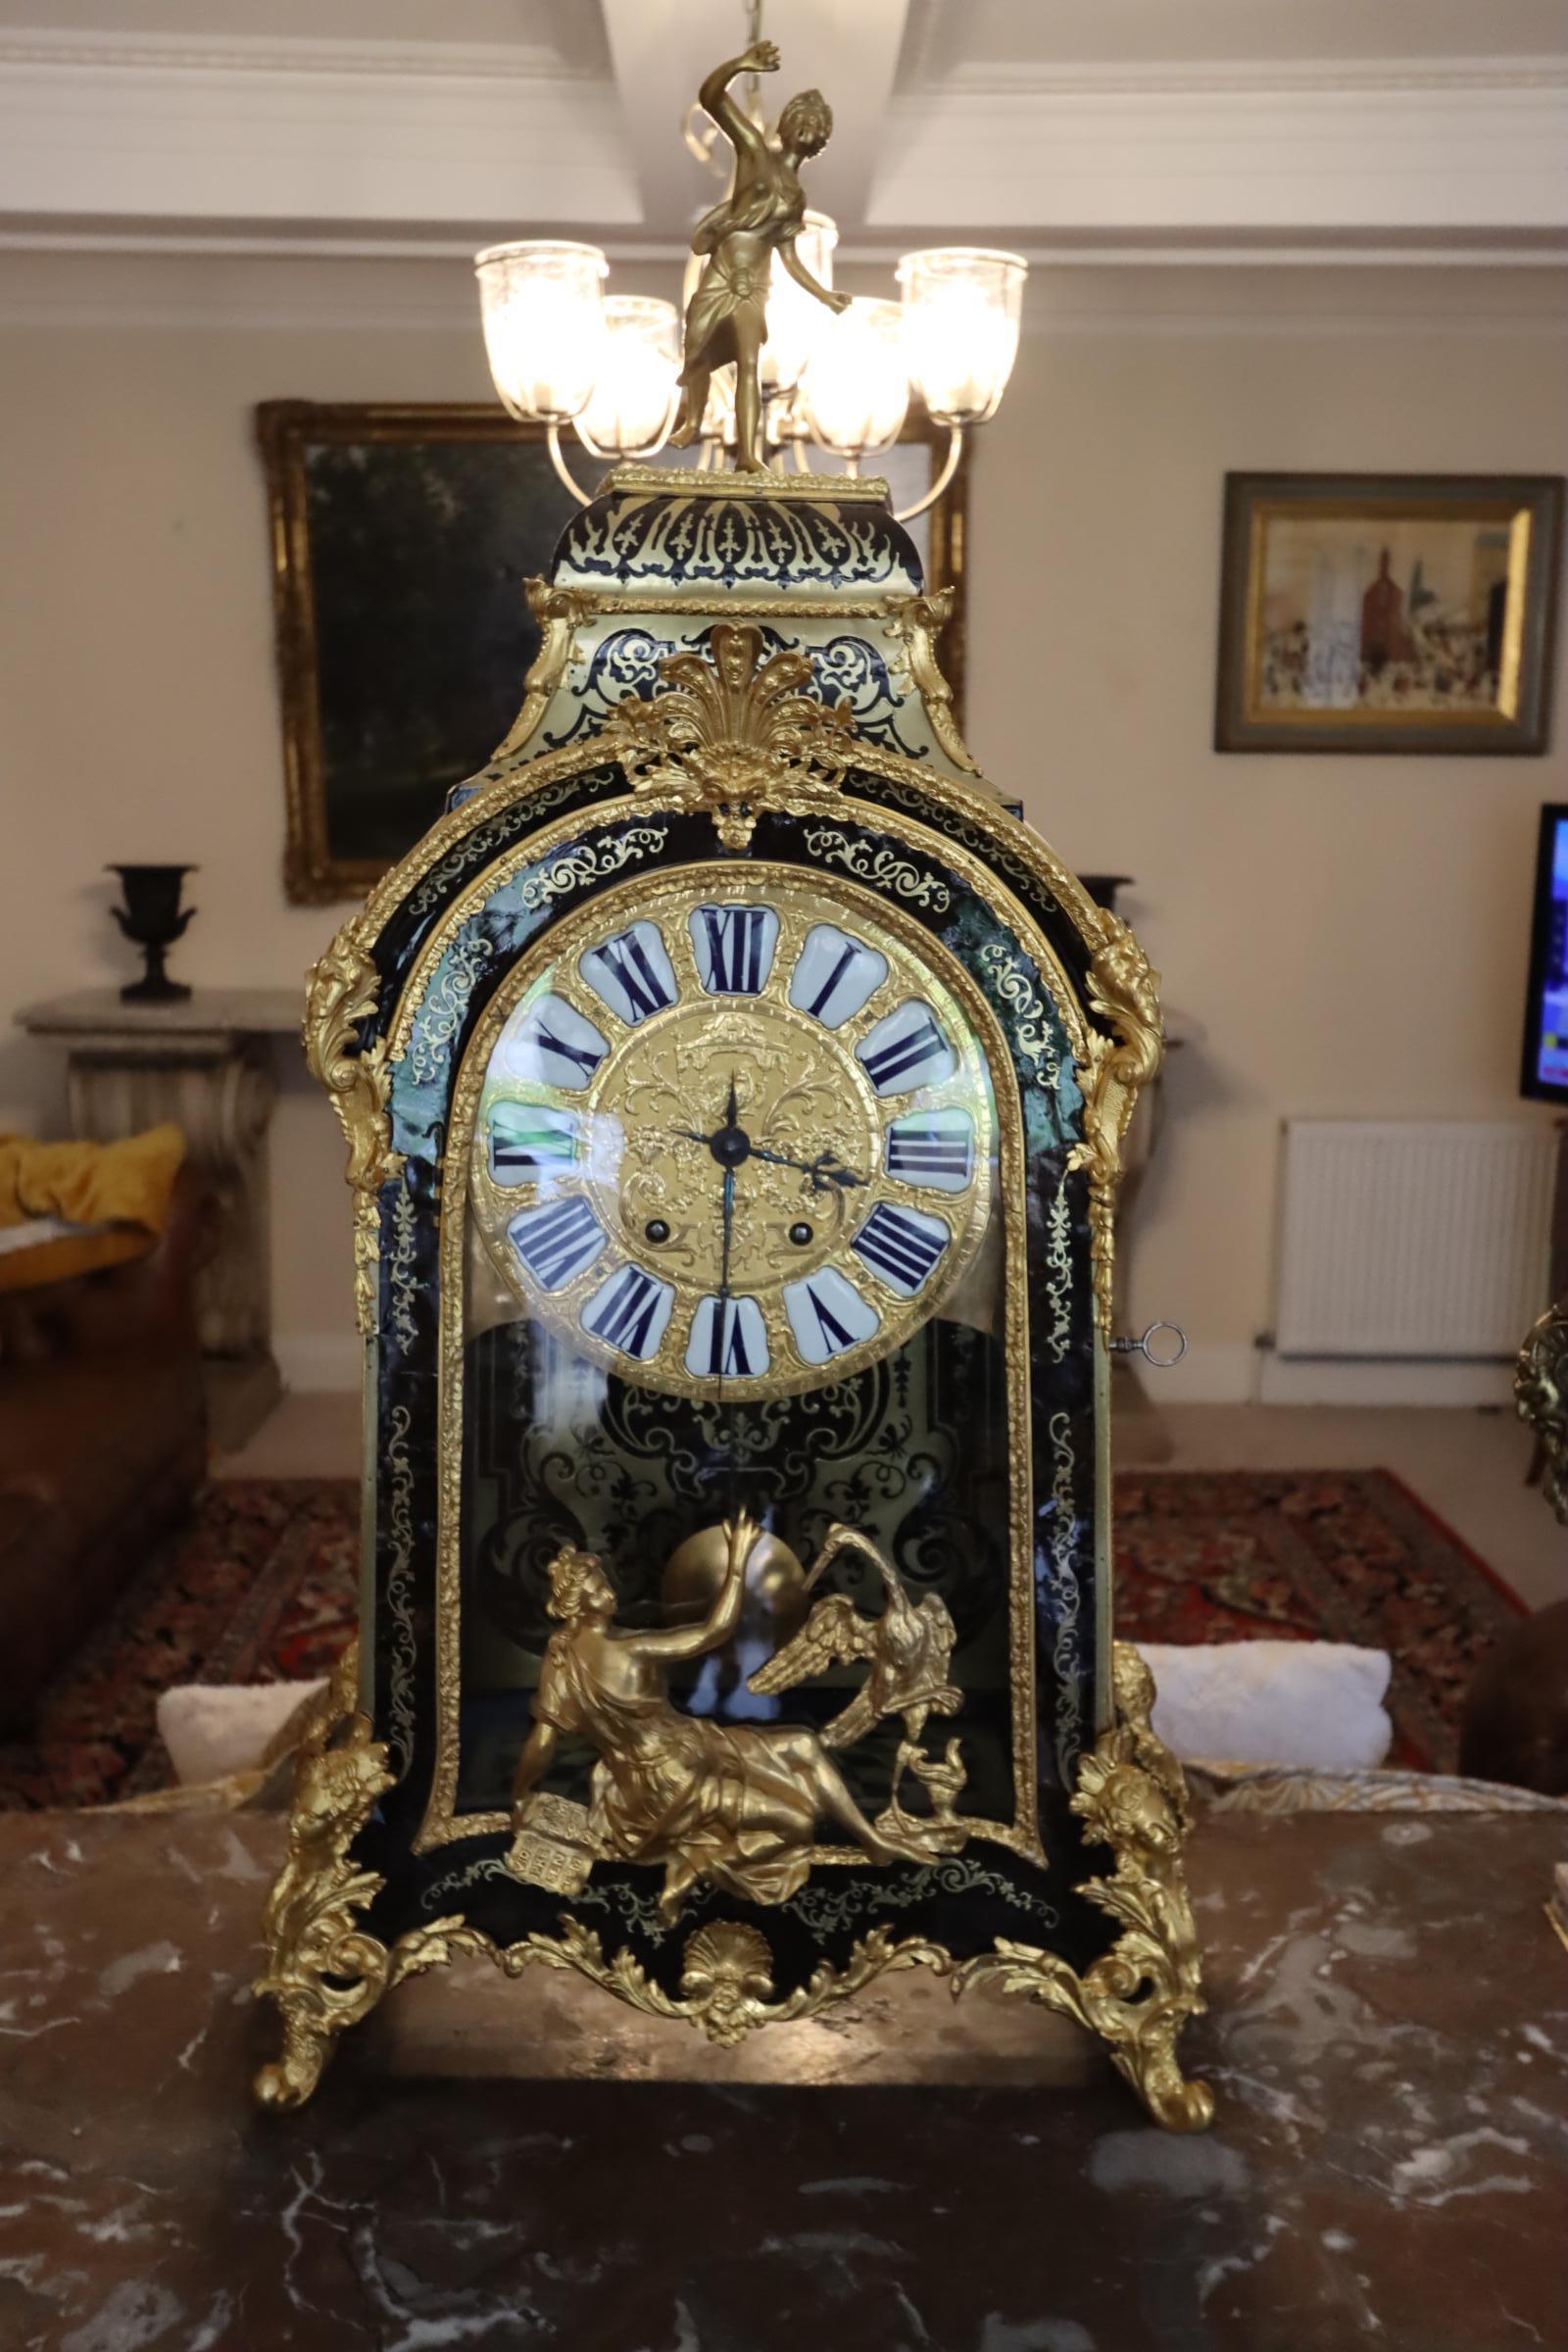 18th century, guilt bronze mounted table clock, with tortoise shell. This truly is an exceptional clock.